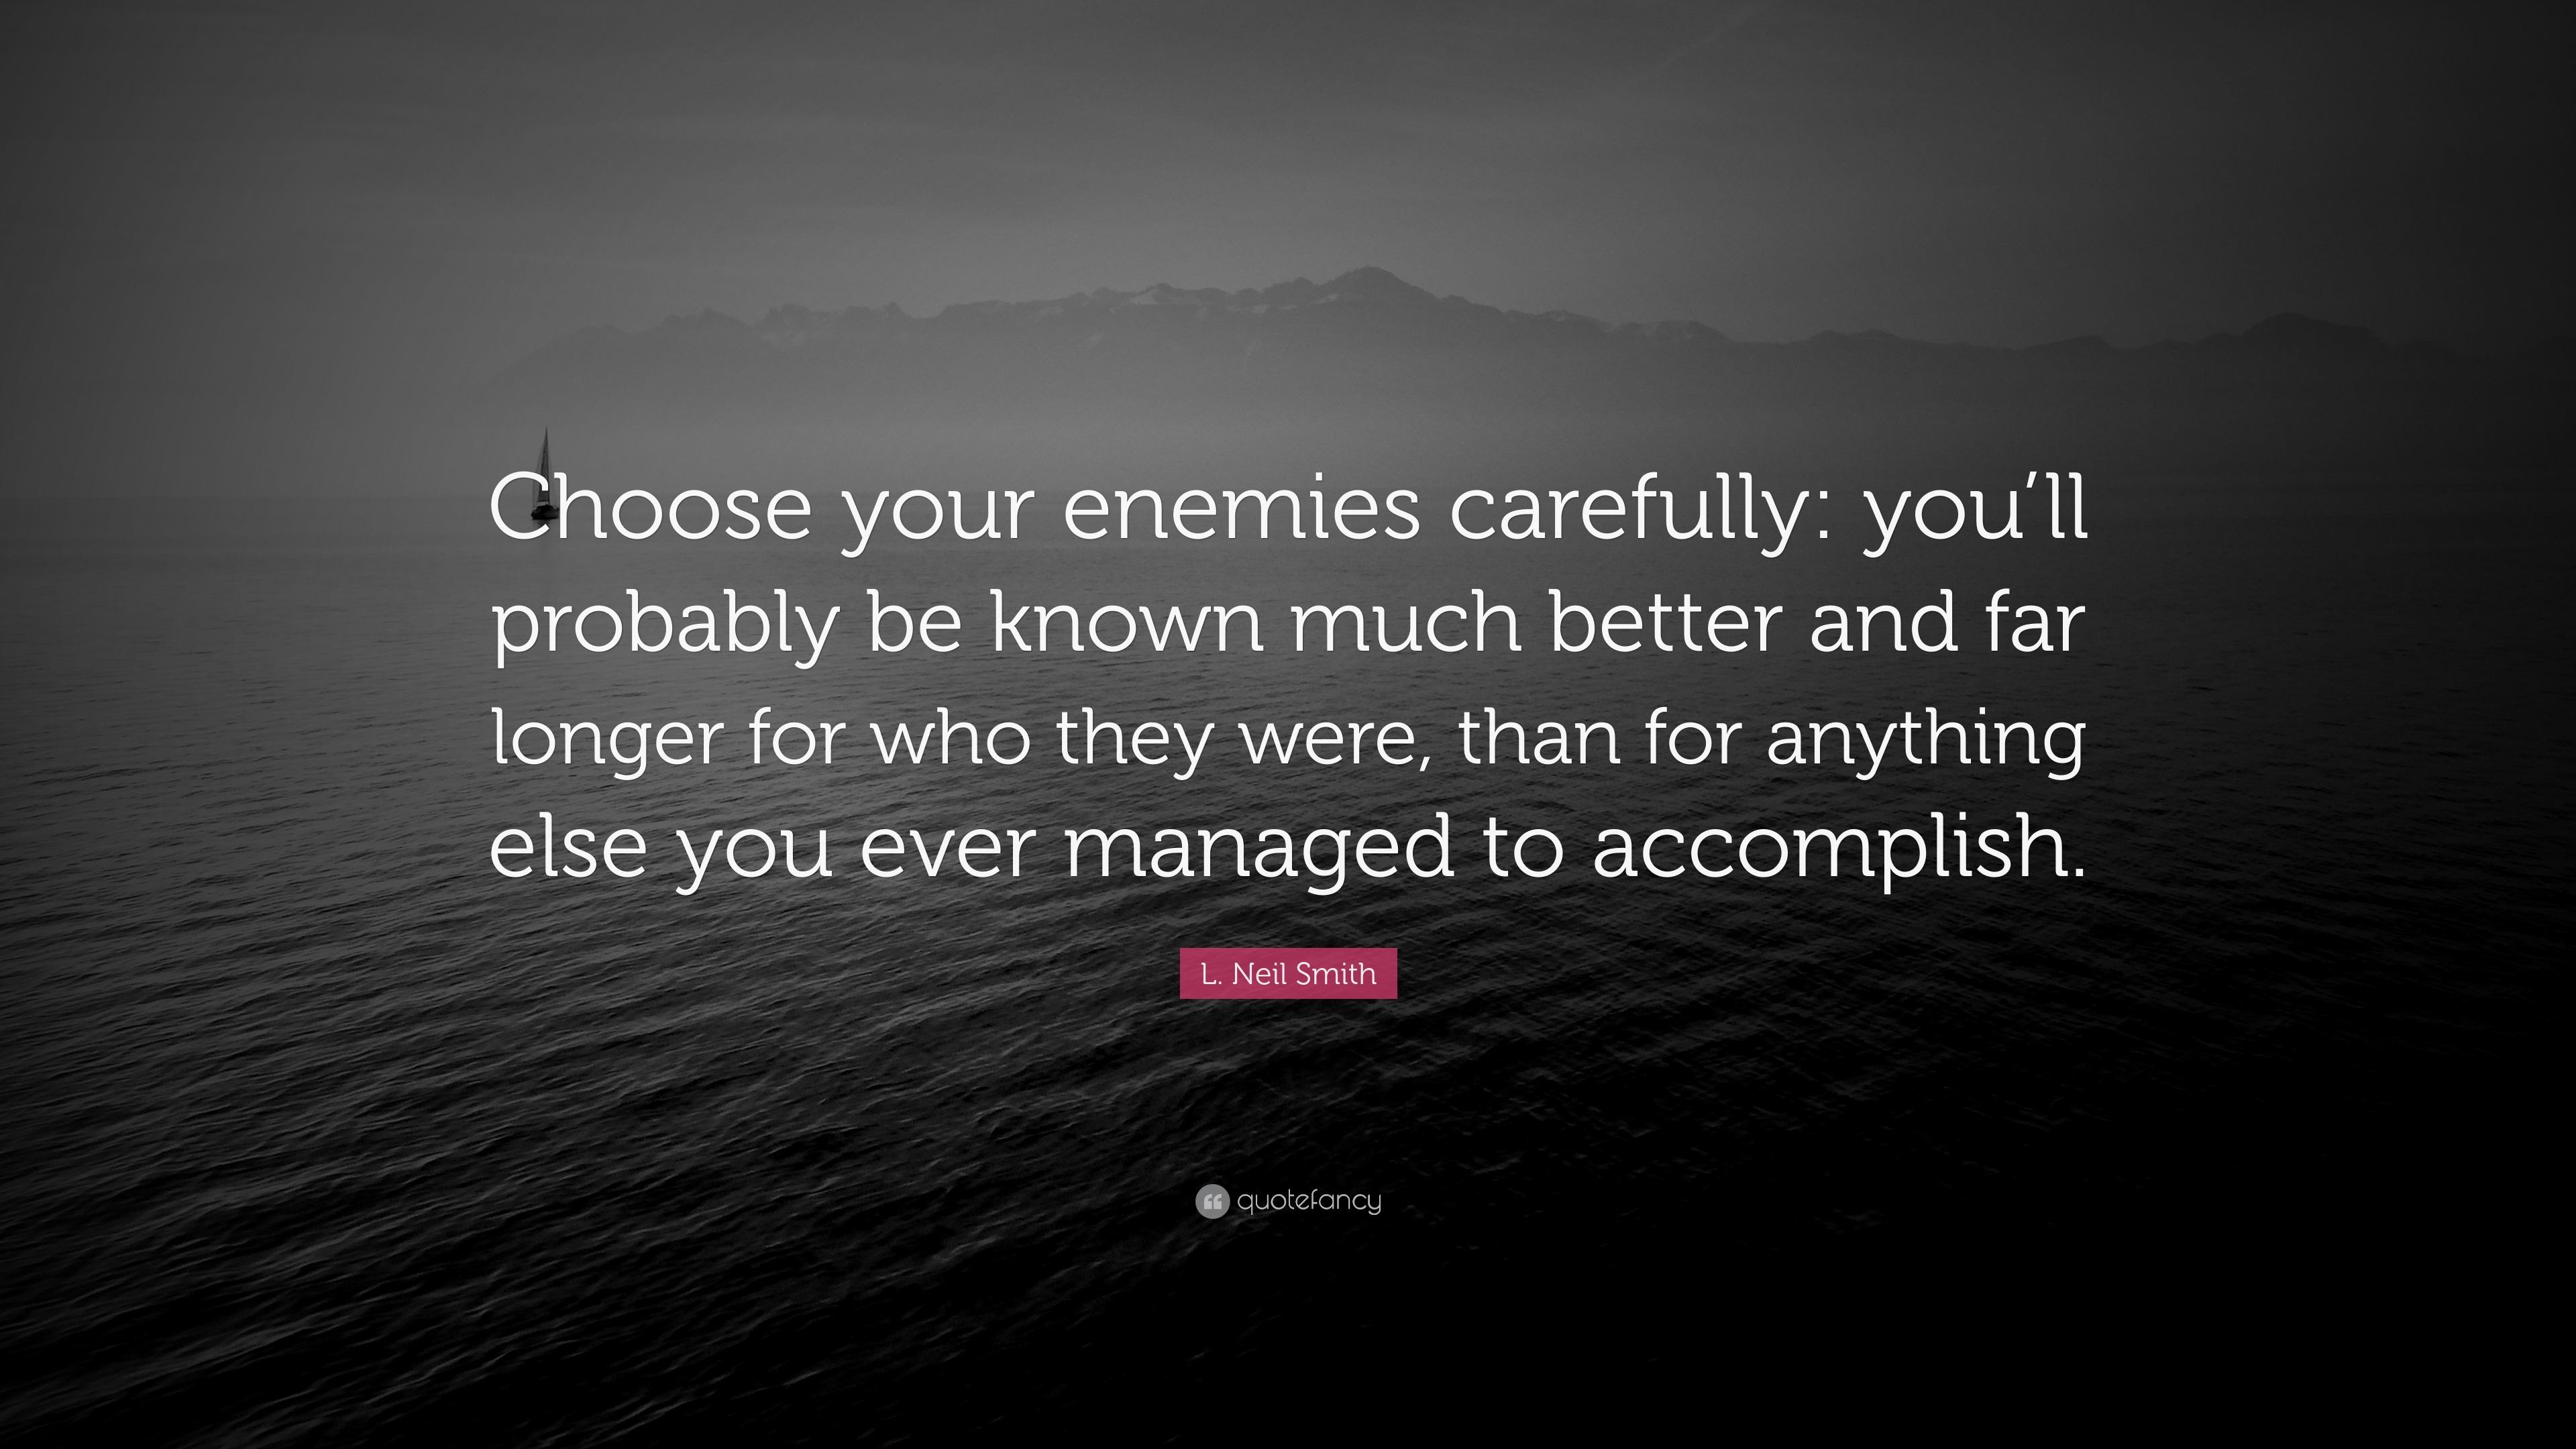 L. Neil Smith Quote: “Choose your enemies carefully: you’ll probably be ...